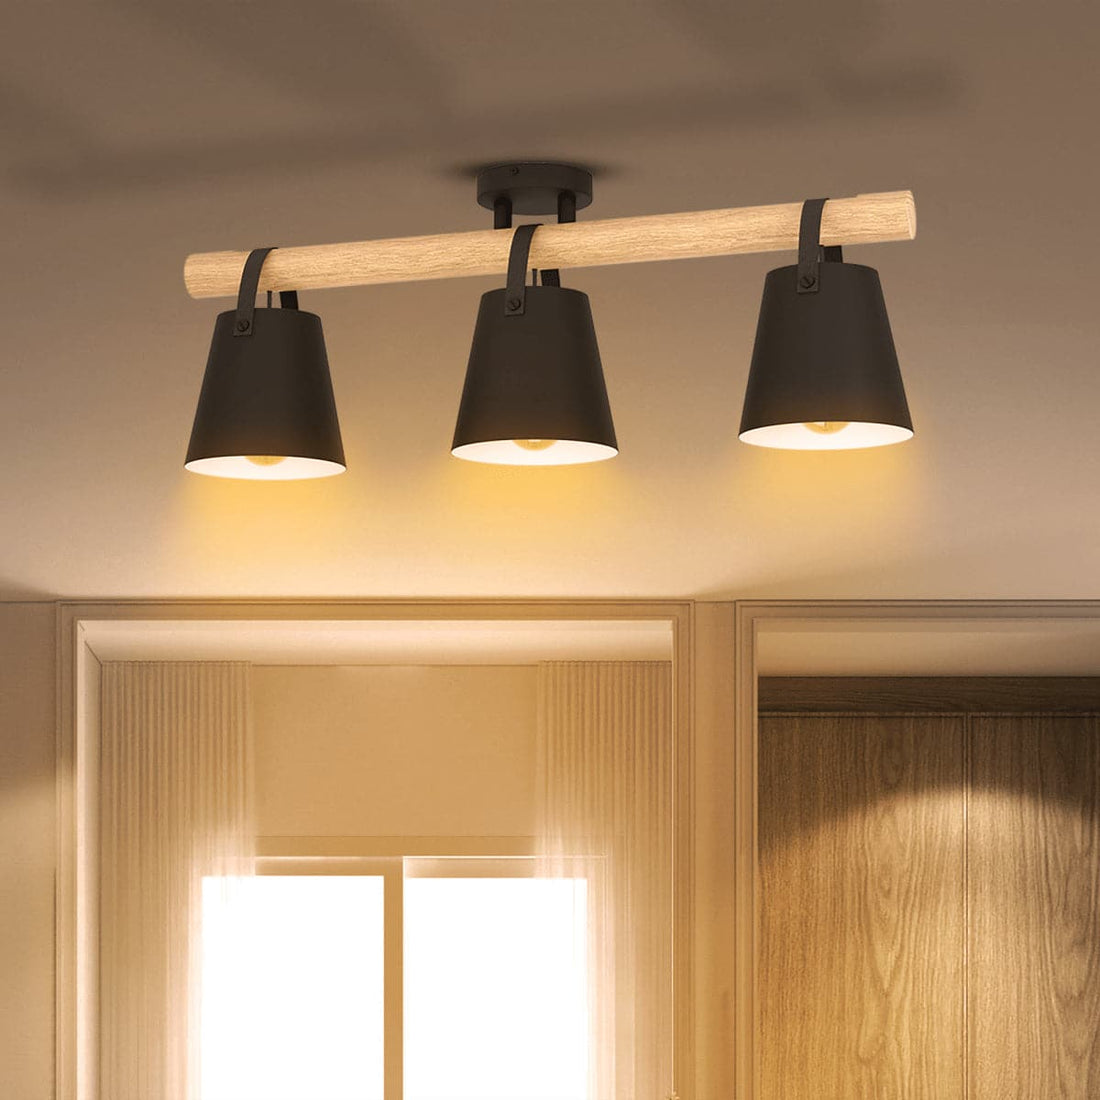 PANDORE CEILING LAMP WOOD AND METAL BLACK 75CM 3XE27 - best price from Maltashopper.com BR420007567